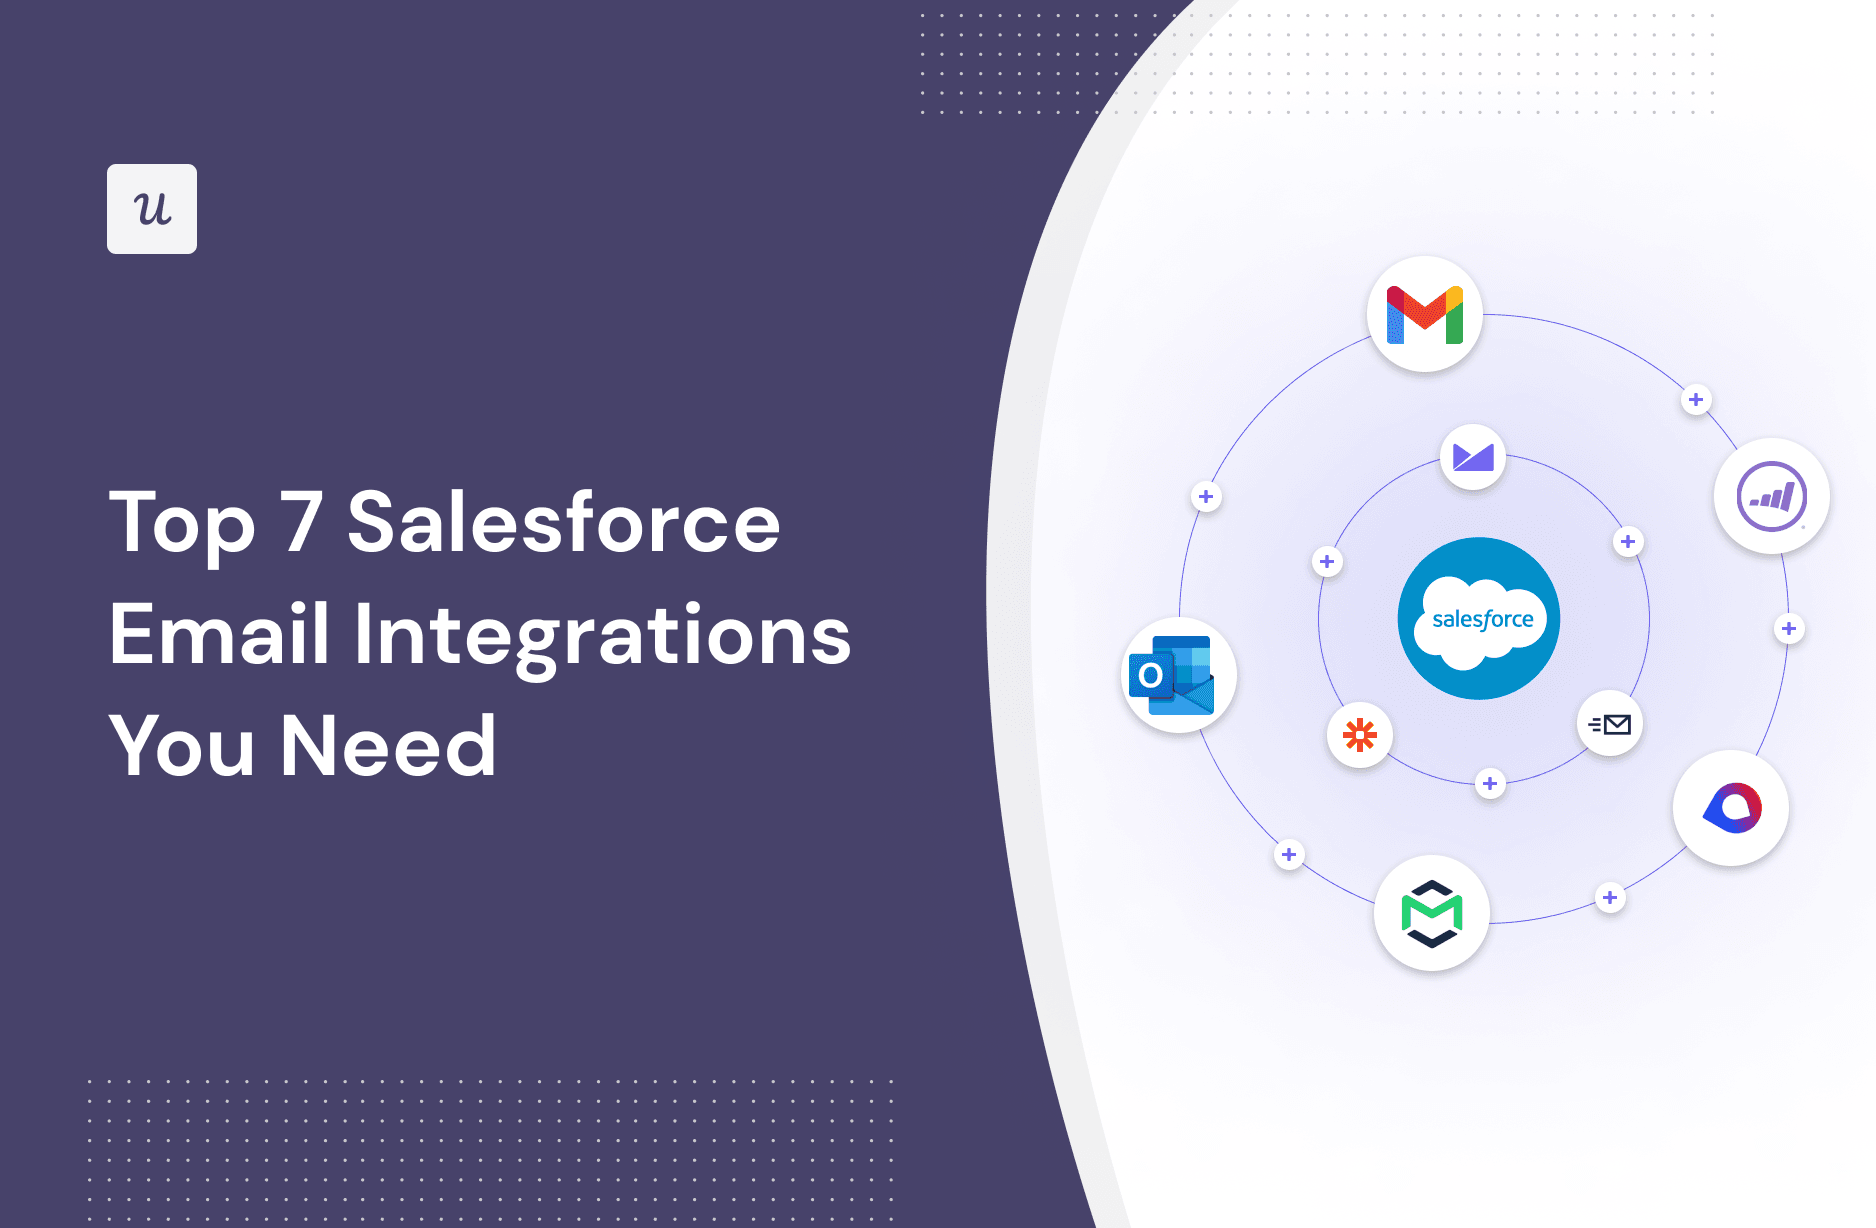 Top 7 Salesforce Email Integrations You Need cover